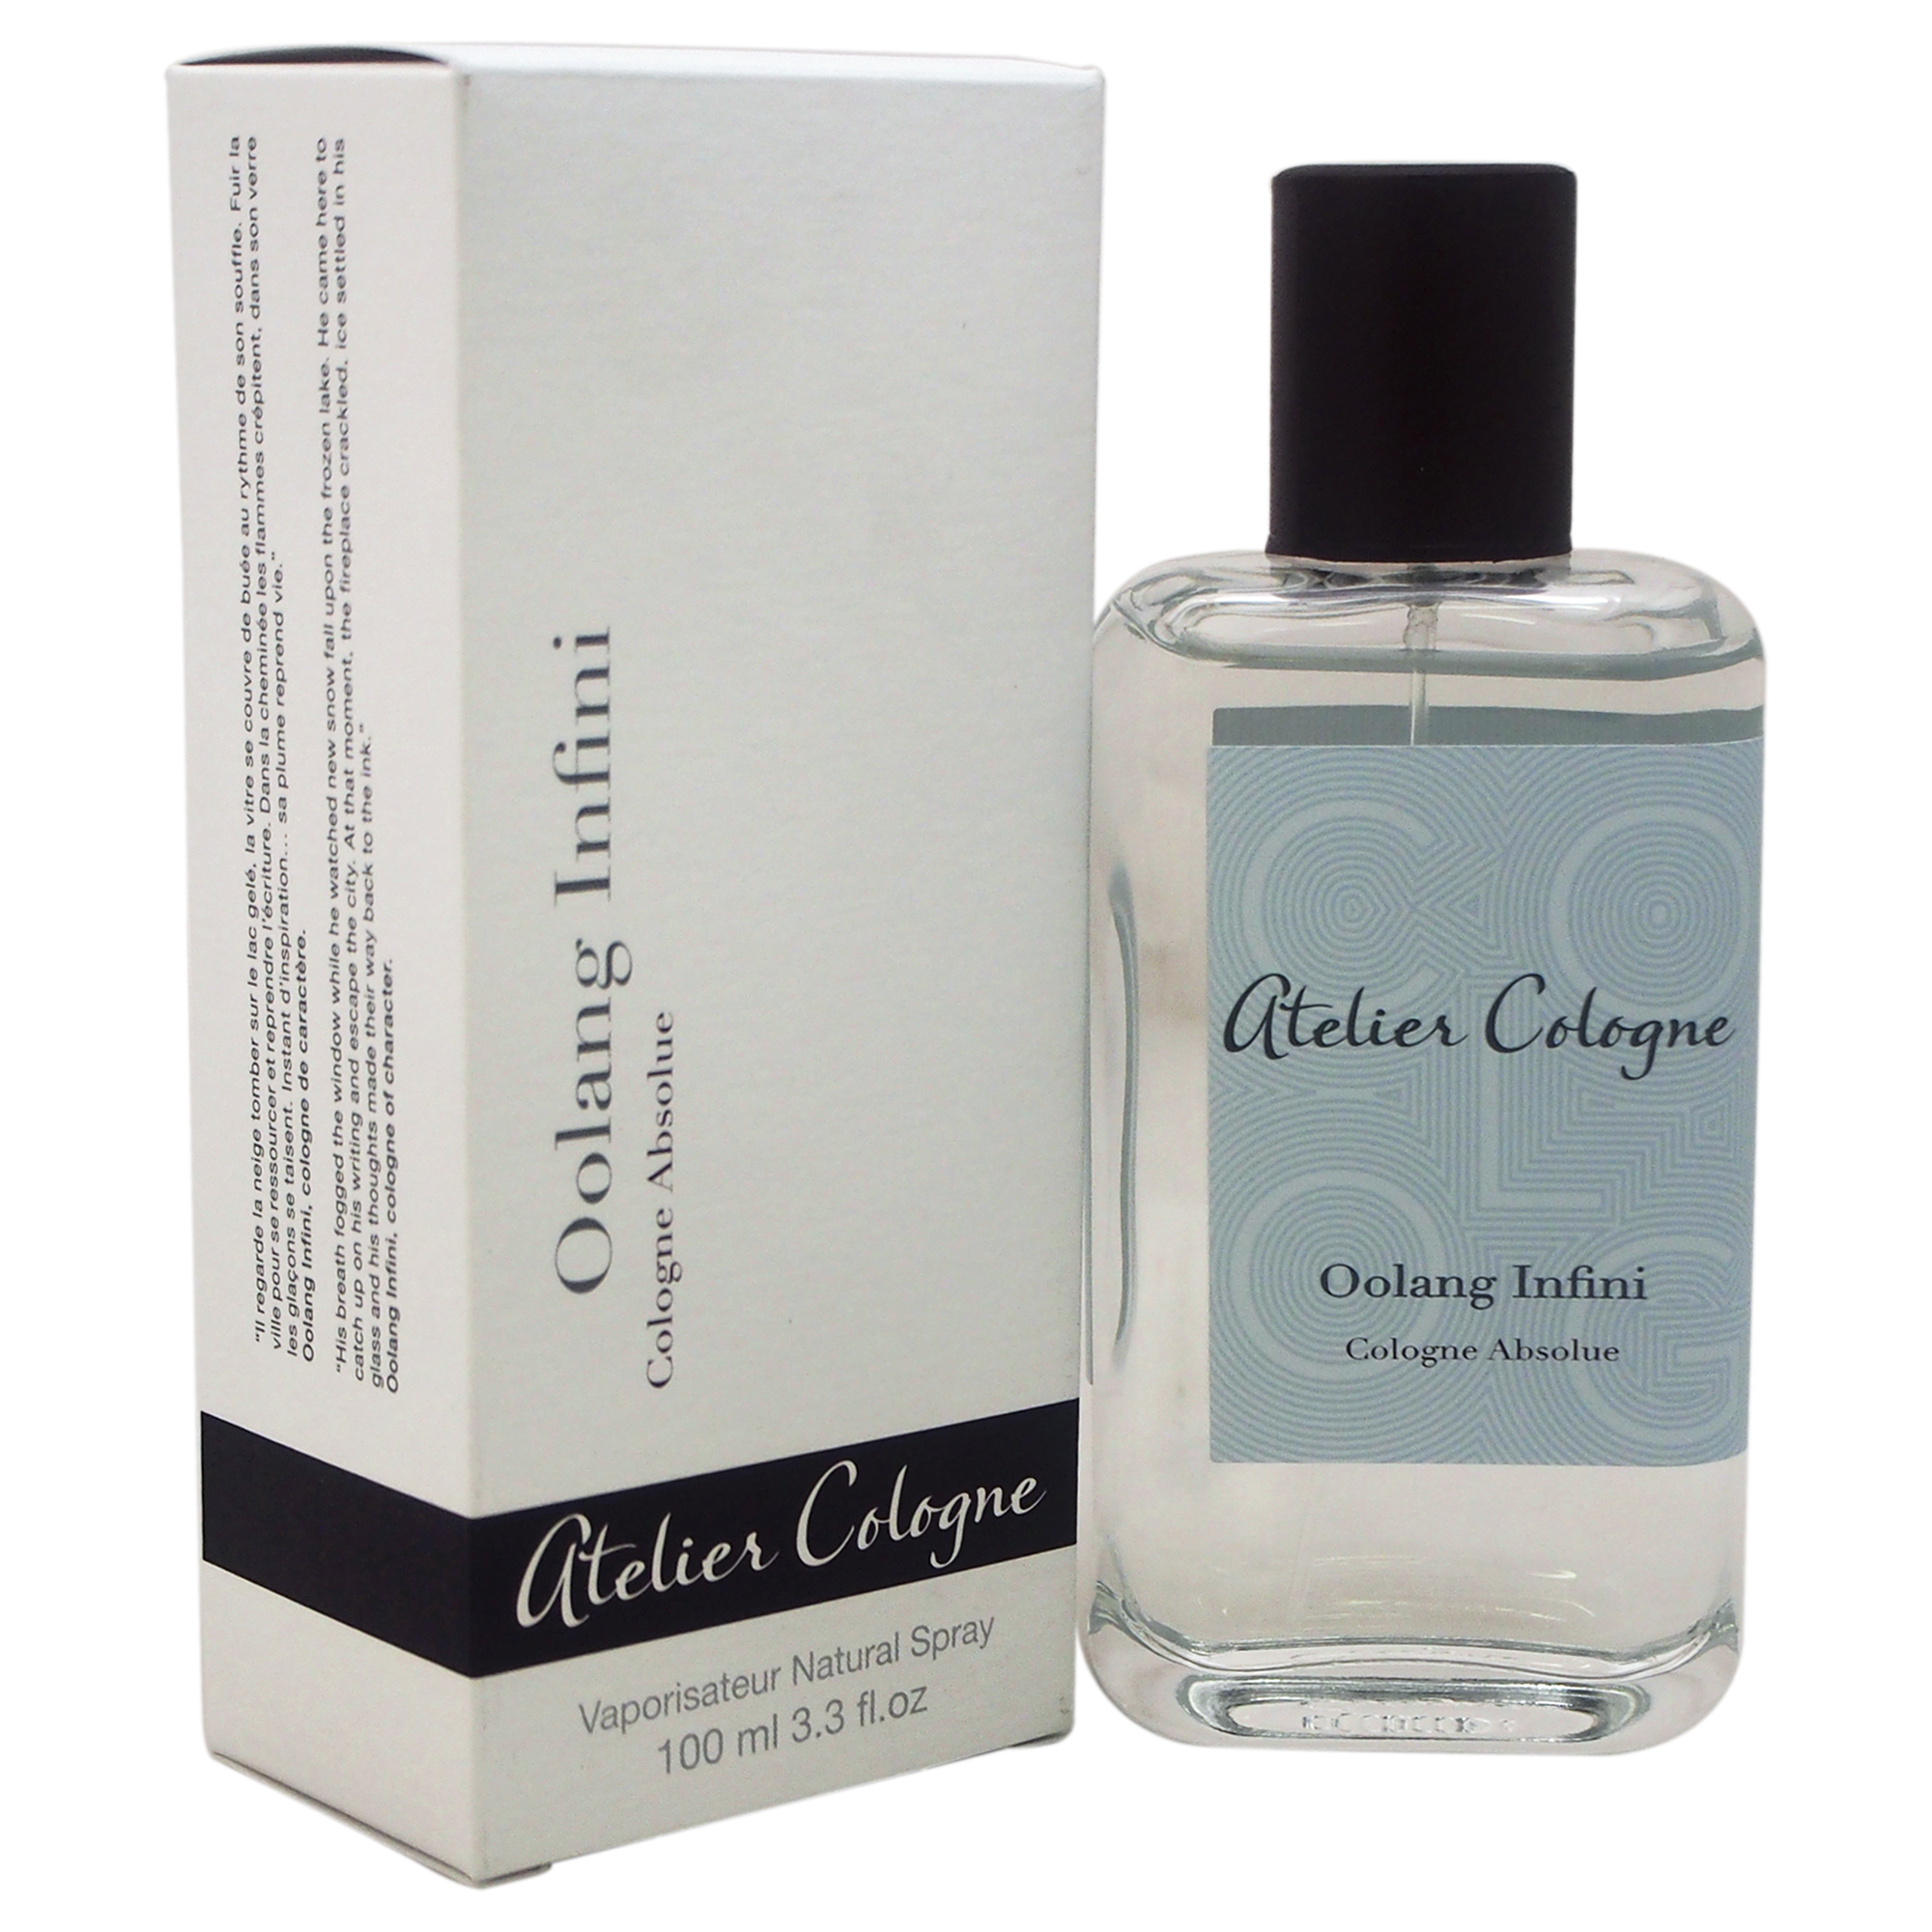 Oolang Infini by Atelier Cologne for Unisex - 3.3 oz Cologne Absolue Spray